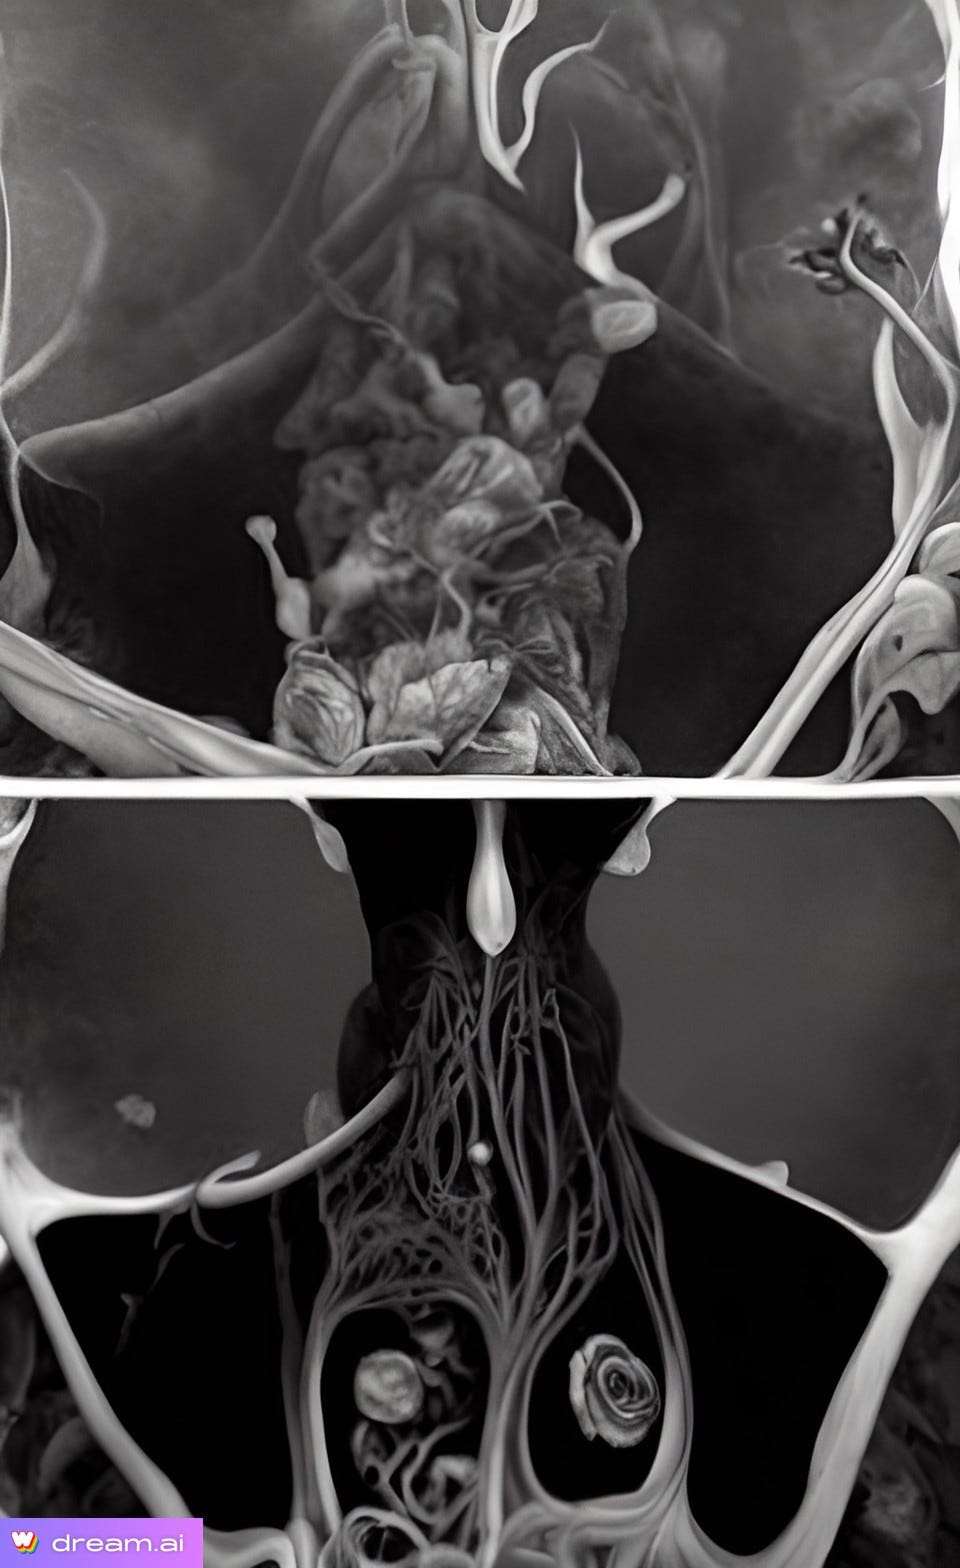 A.I. impressions of radiographic sinus images interpreted as if they were plants and flowers